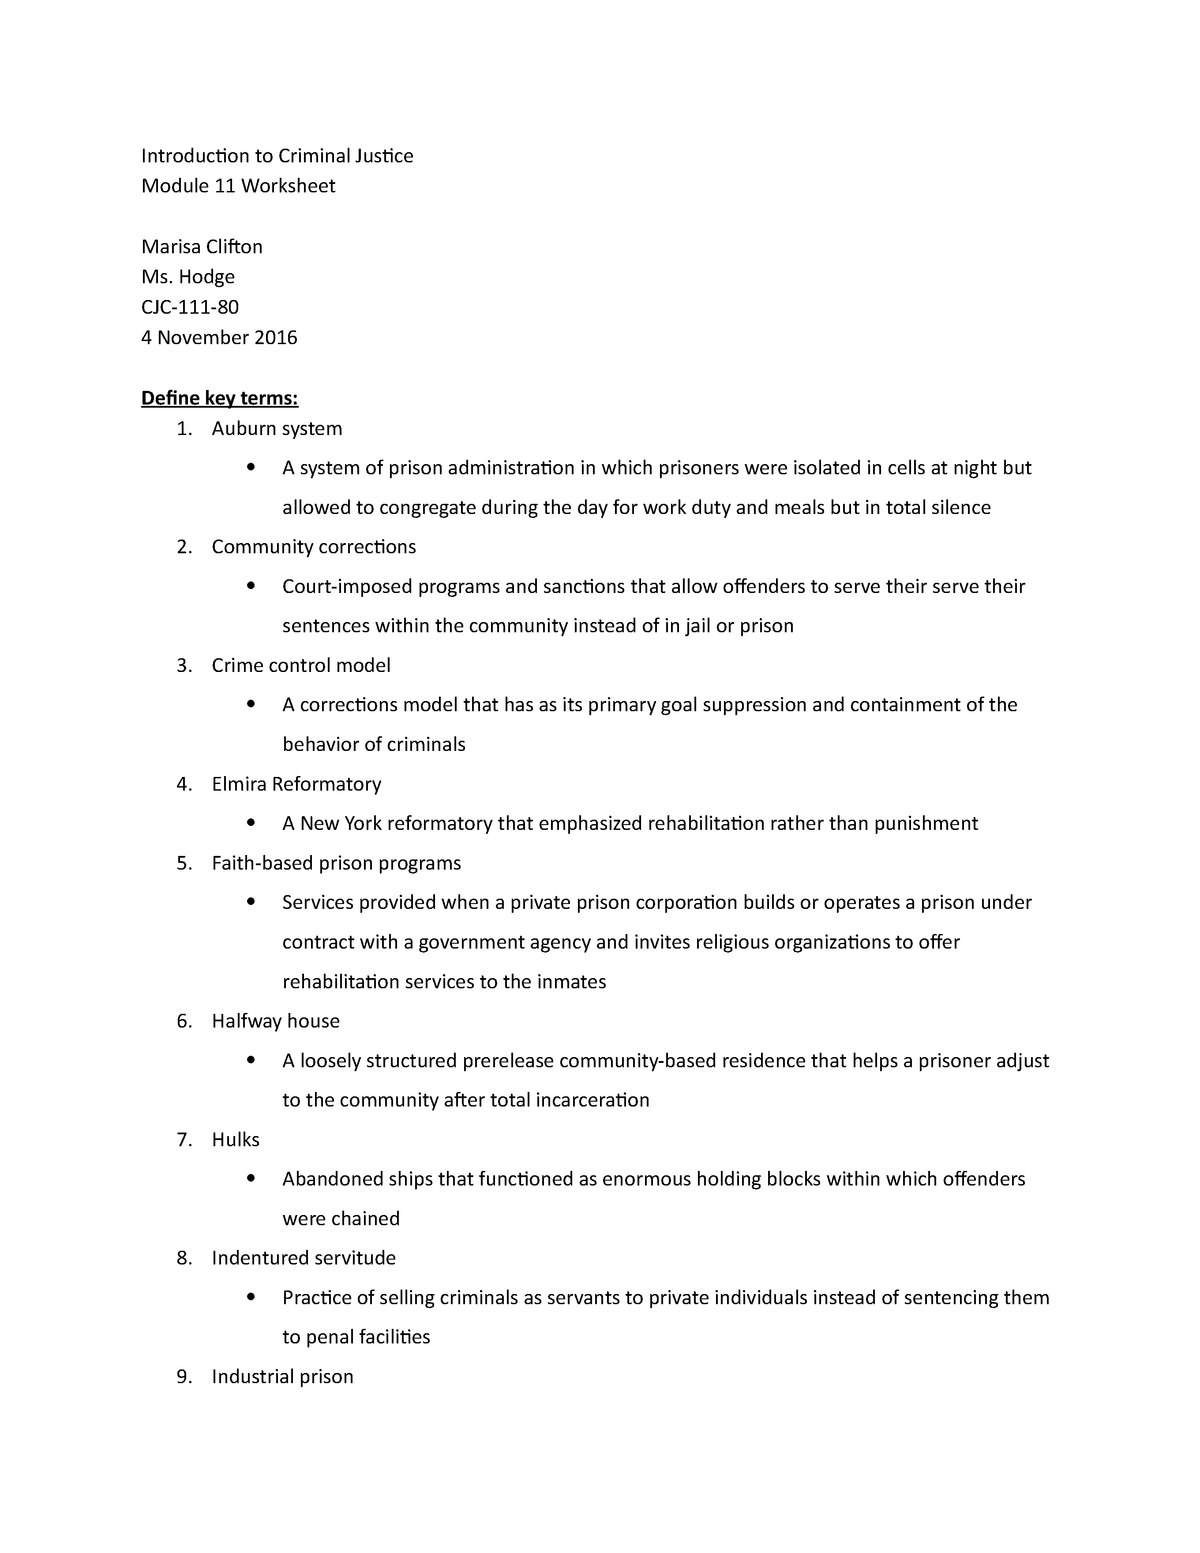 Chapter 11 worksheet - Introduction to Criminal Justice Module 11 ...